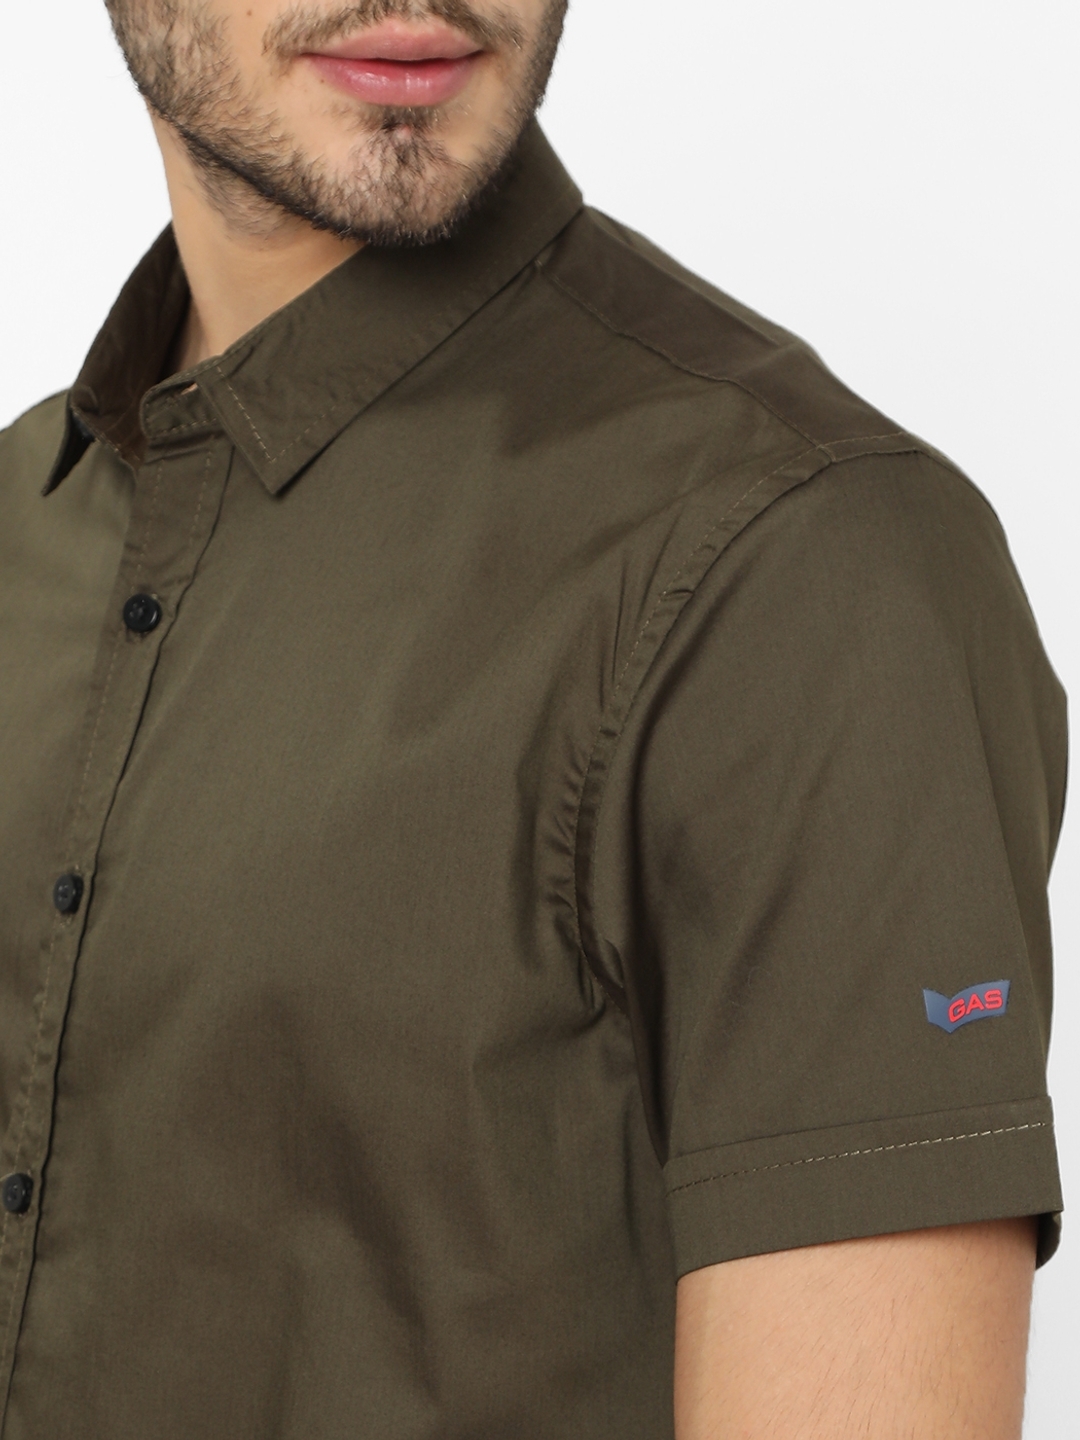 Slim Fit Shirt with Short Sleeves